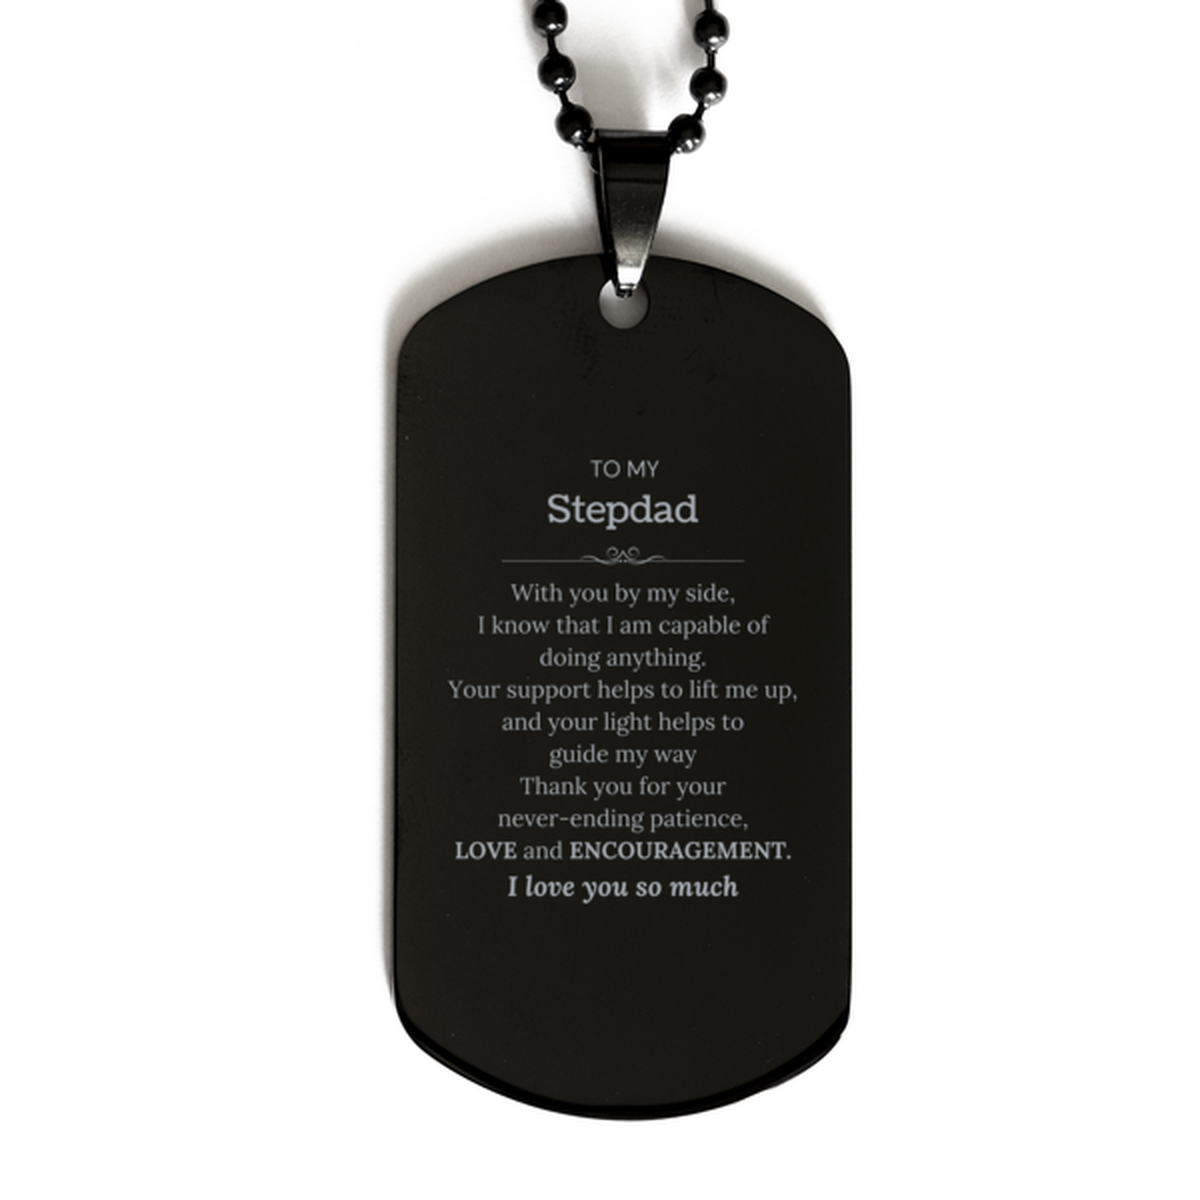 Appreciation Stepdad Black Dog Tag Gifts, To My Stepdad Birthday Christmas Wedding Keepsake Gifts for Stepdad With you by my side, I know that I am capable of doing anything. I love you so much